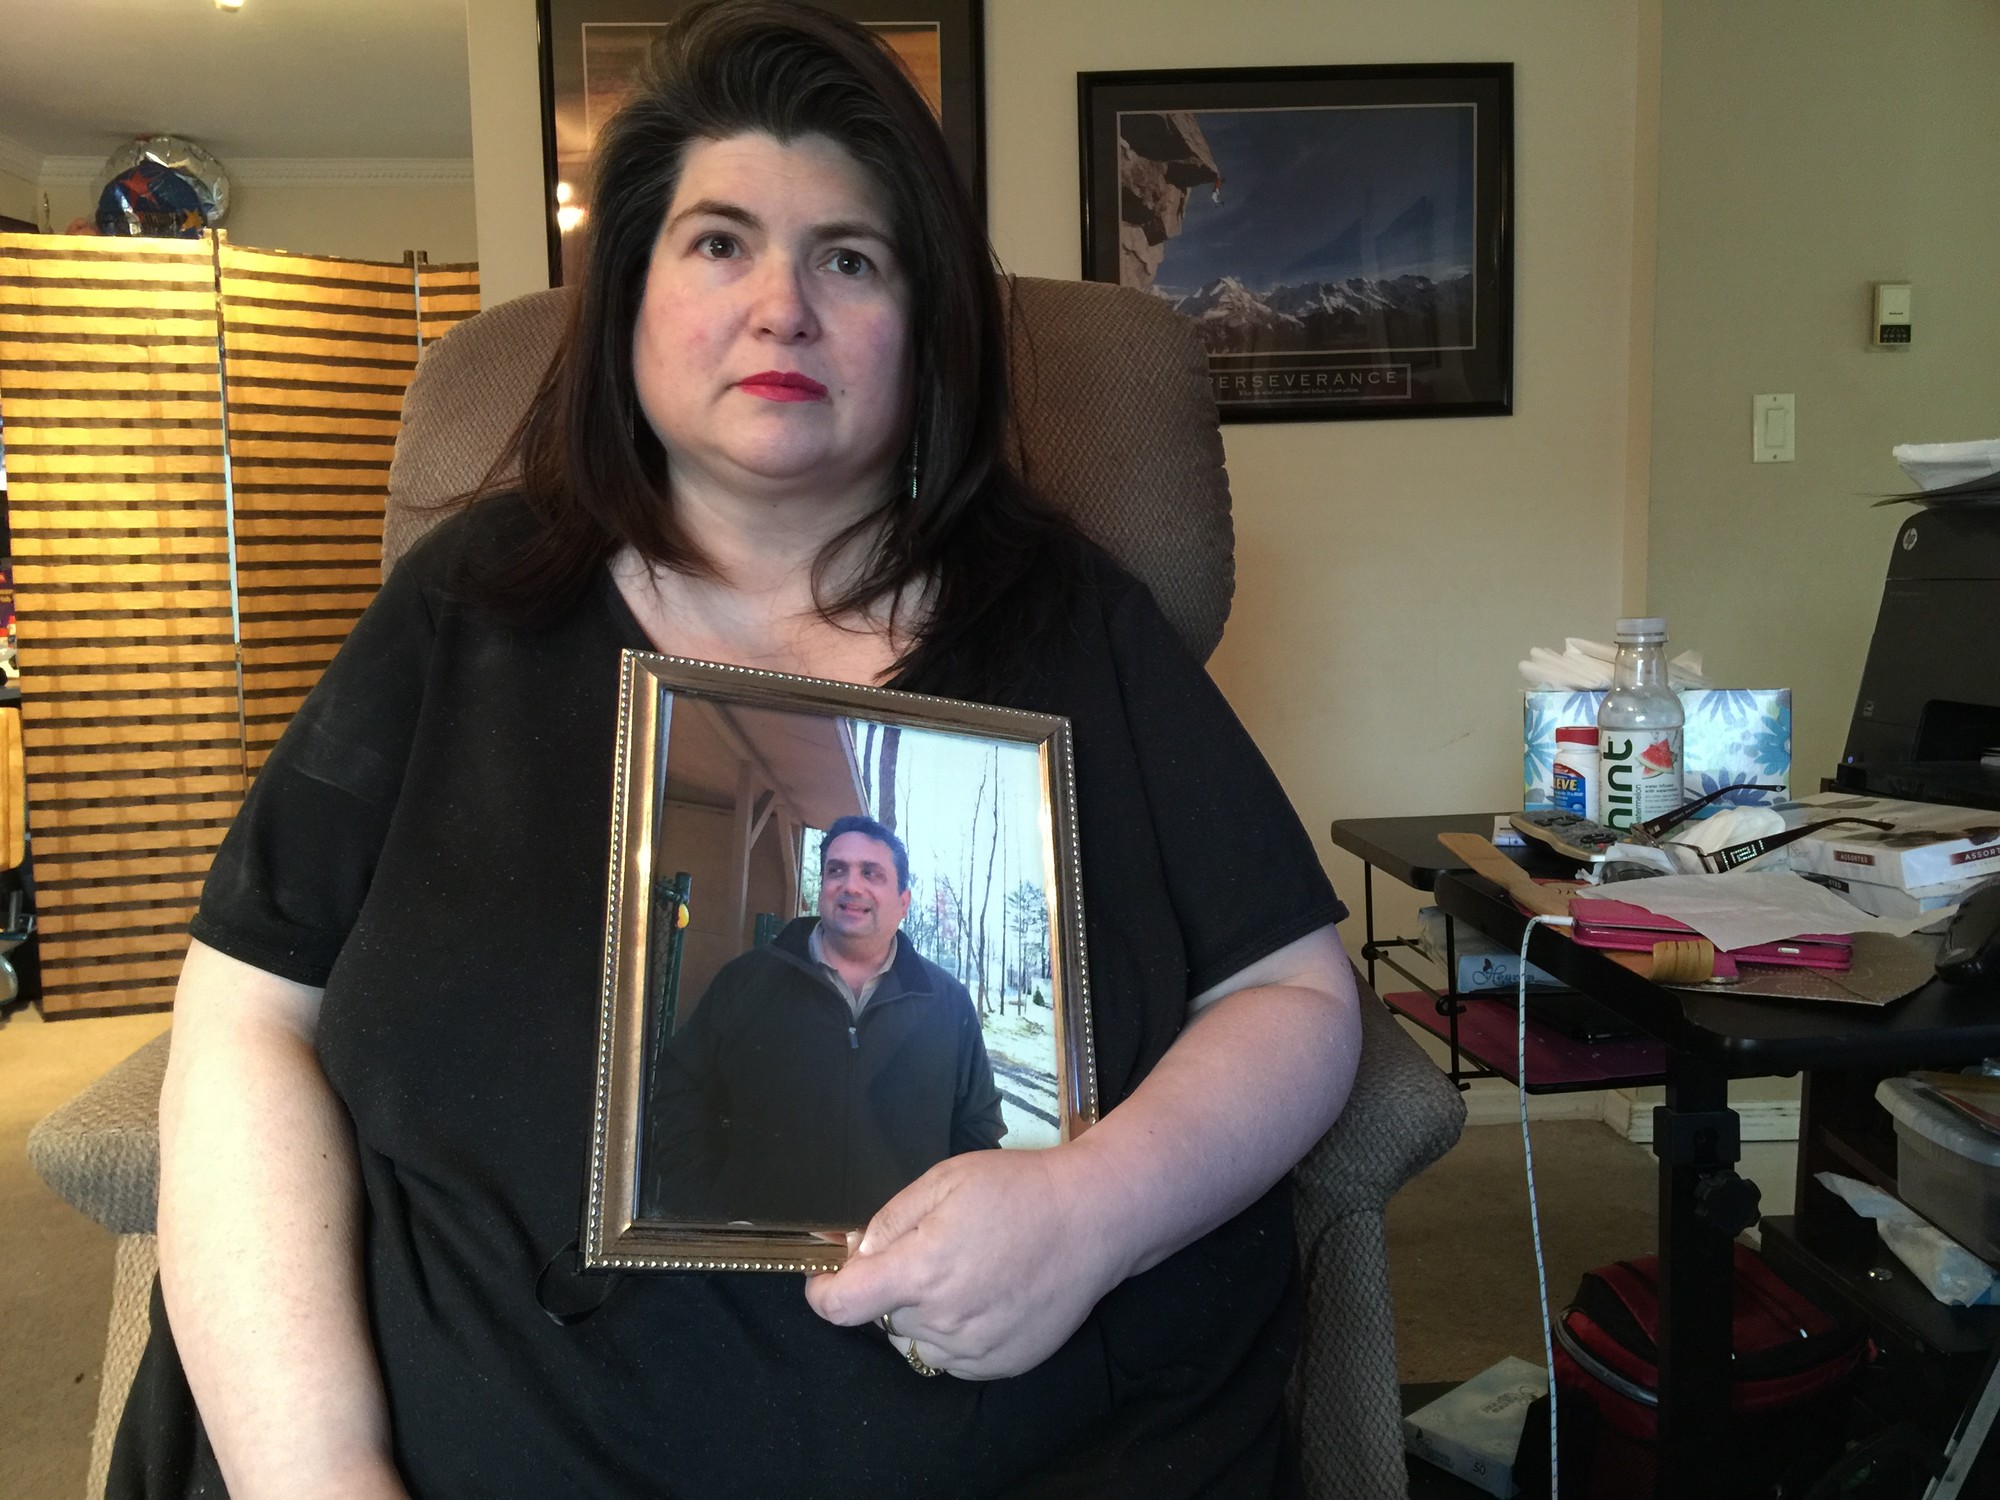 Denise DeCrescito lost her husband, Chris, to a drunken driving accident on Feb. 27, 2013.